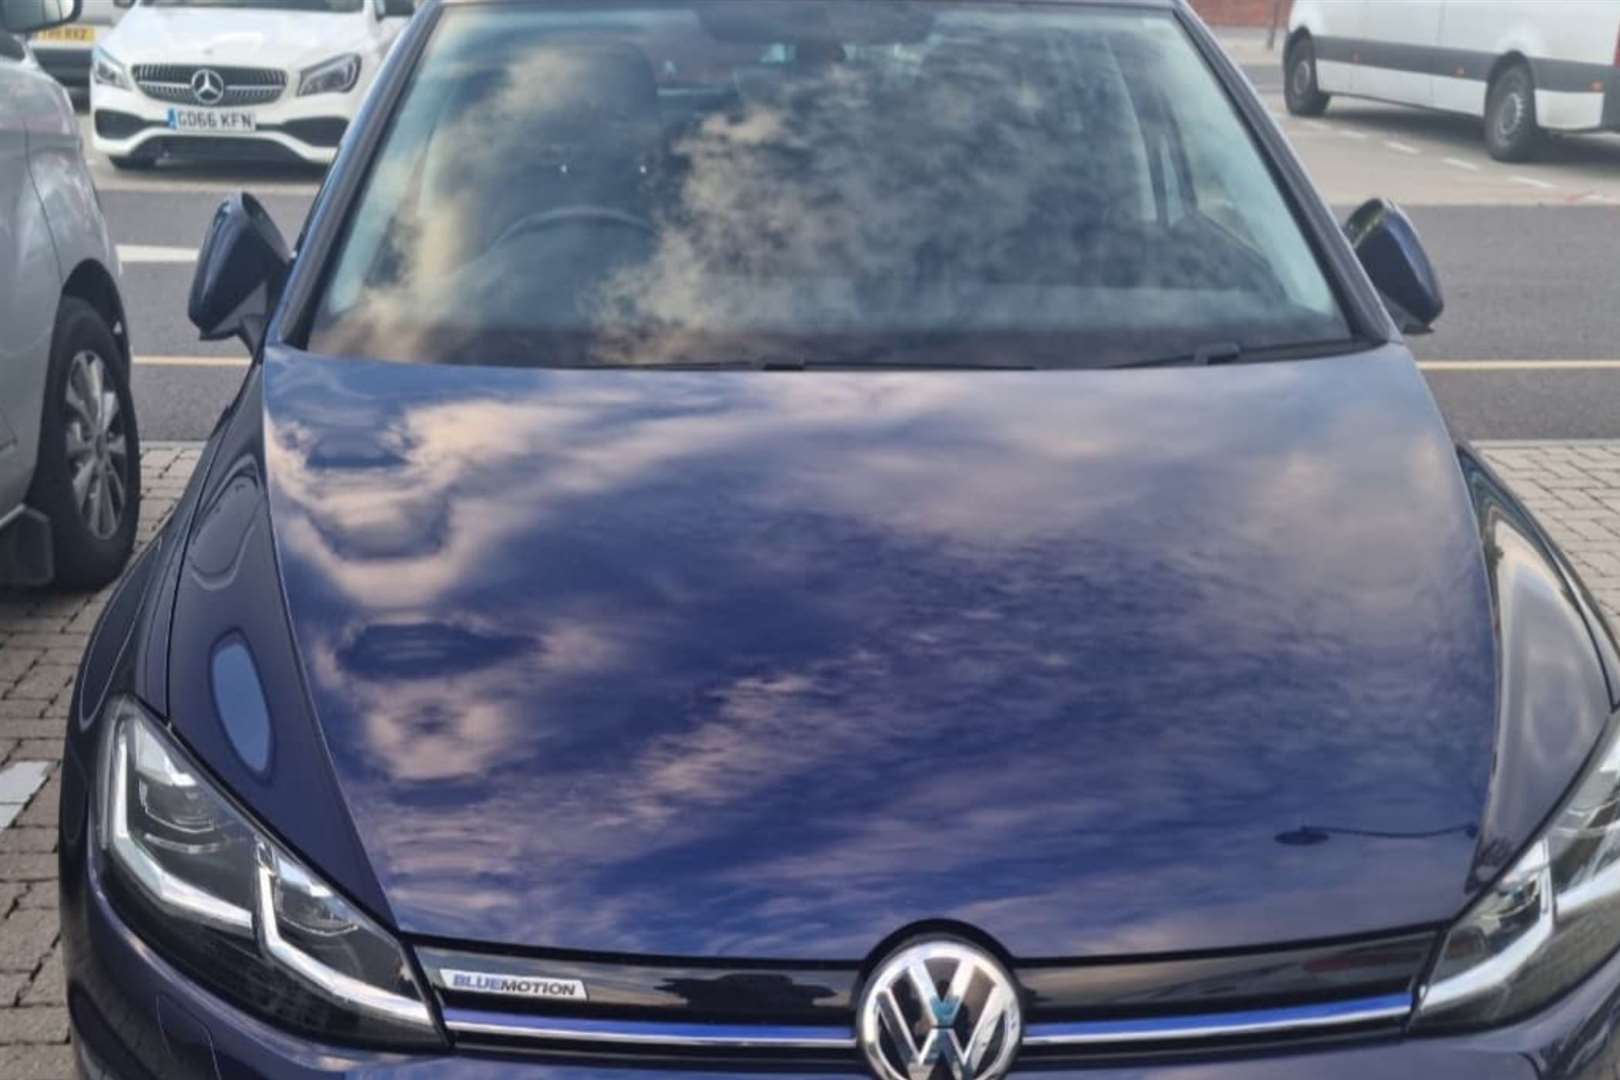 The Volkswagen was found the next day in a car park